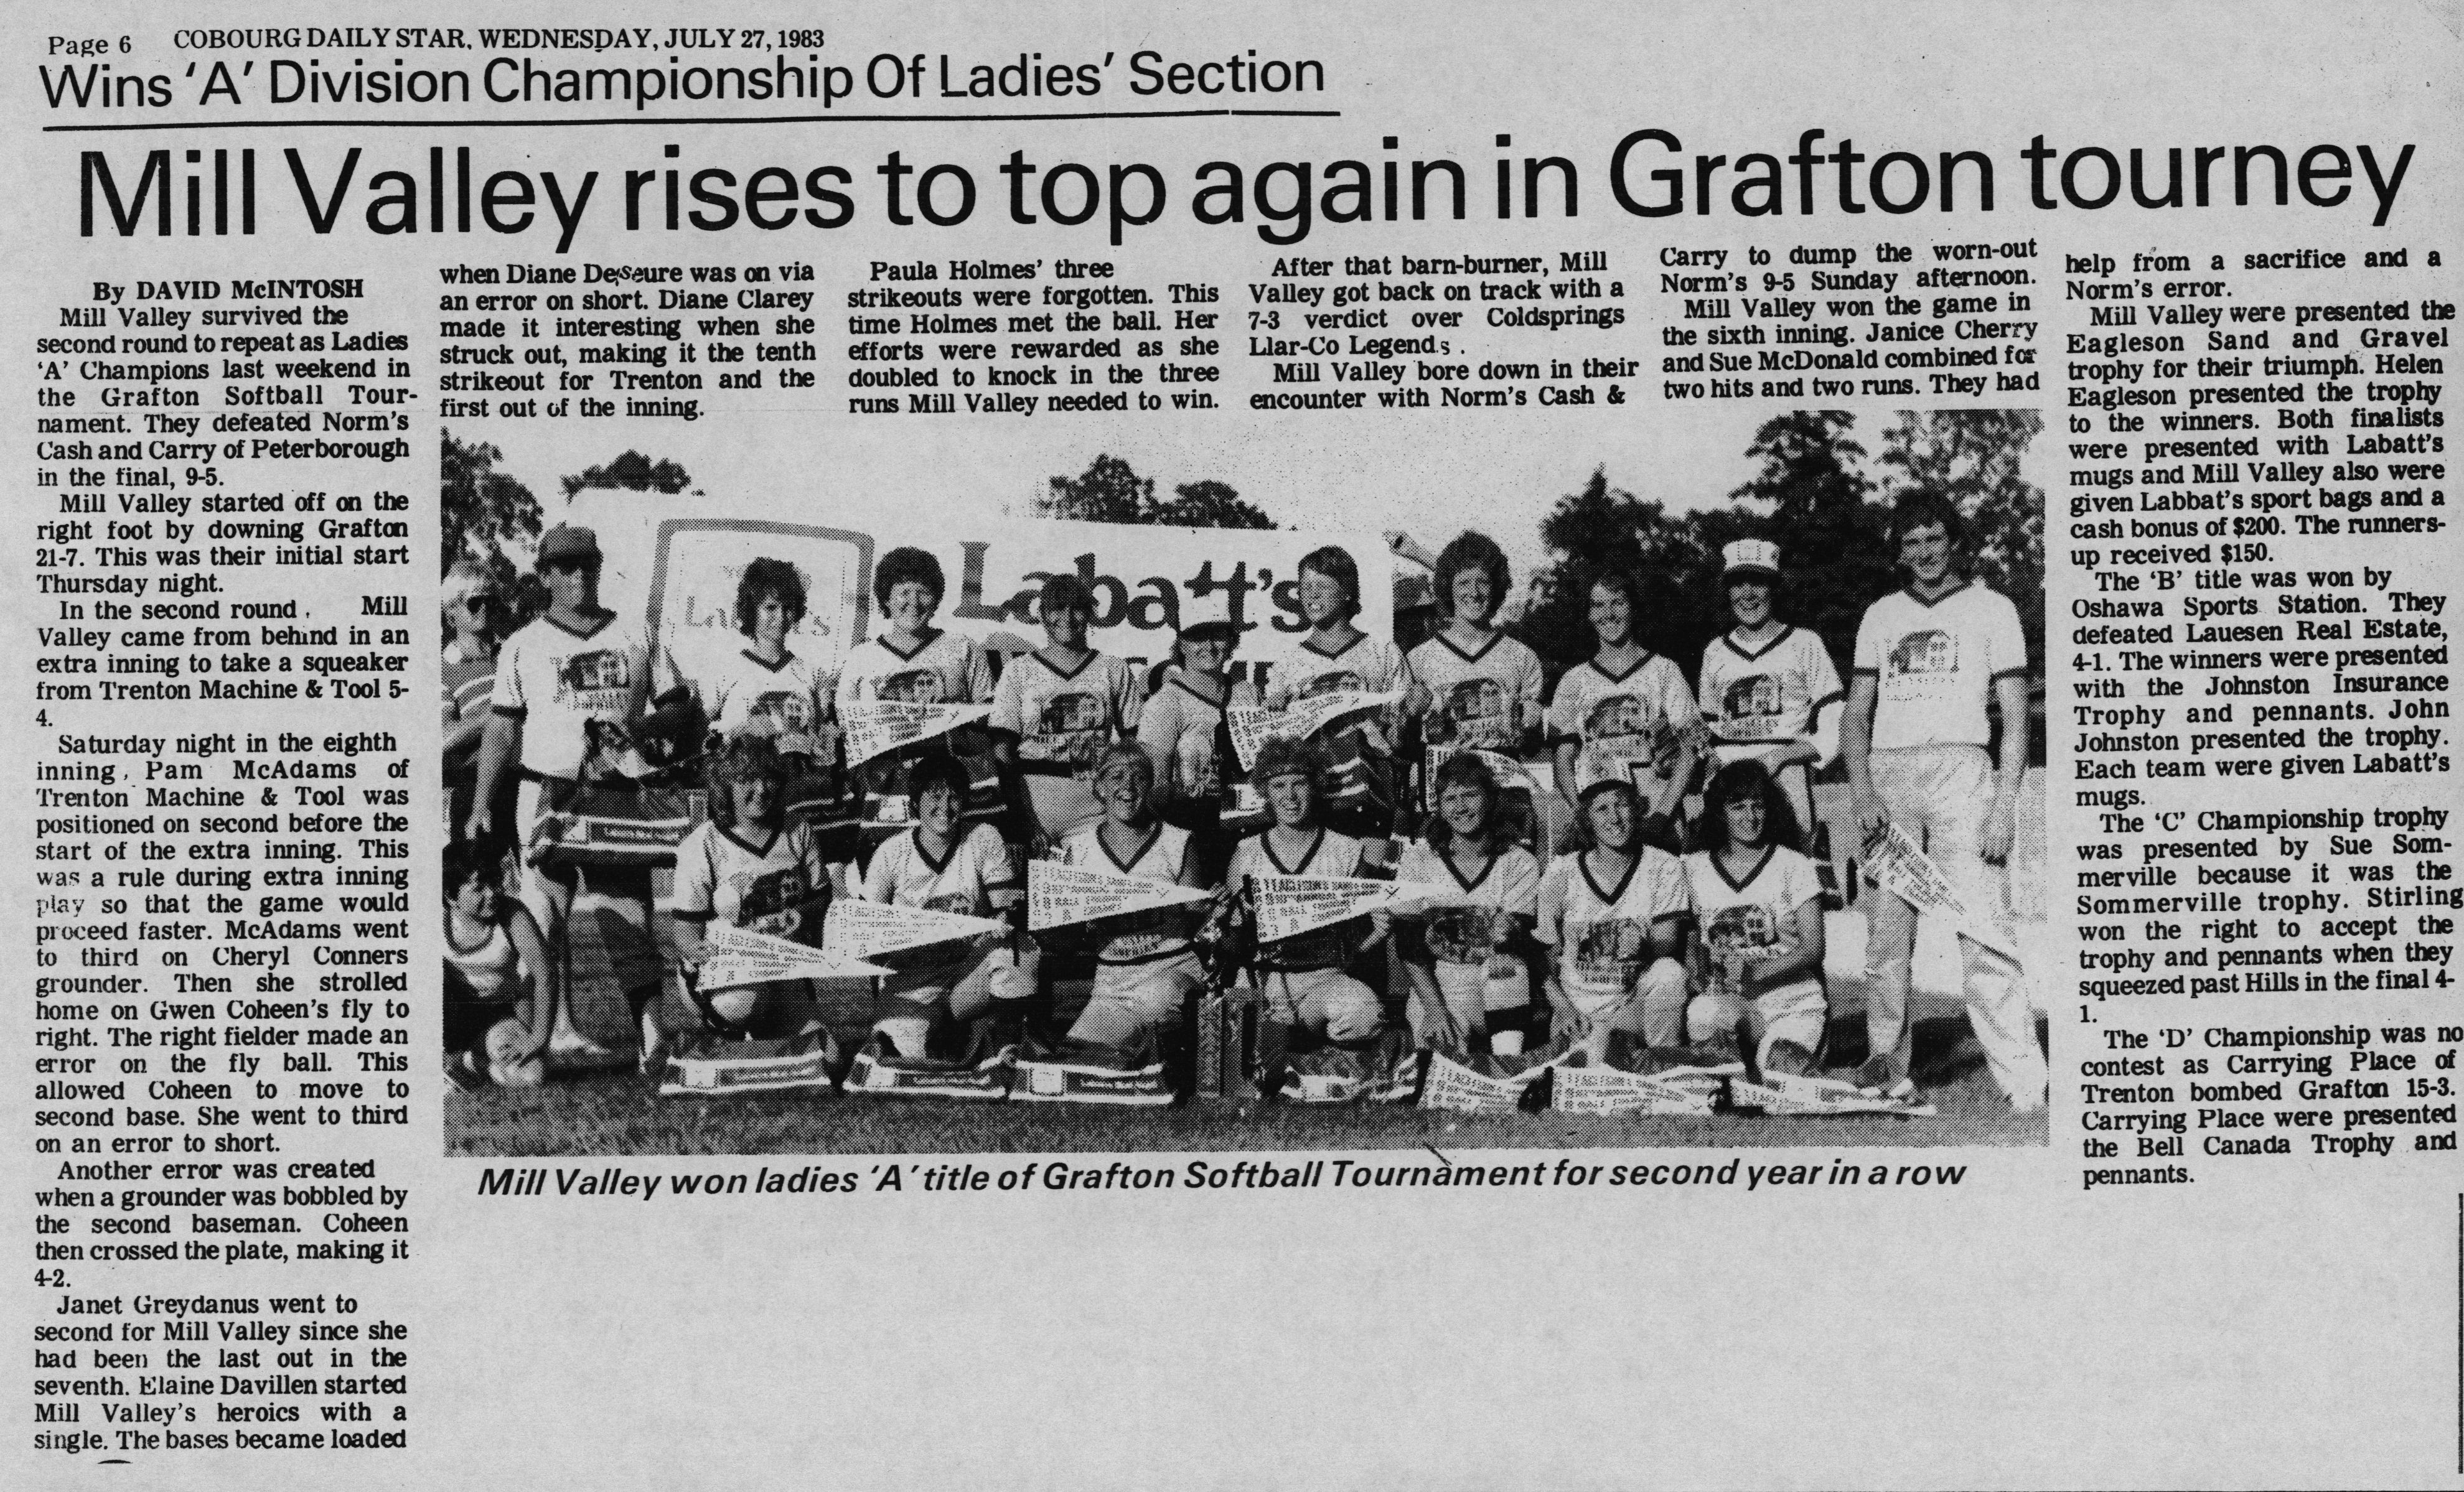 Softball -Grafton Tournament -1983 -Ladies -Summary and A Champs -Mill Valley